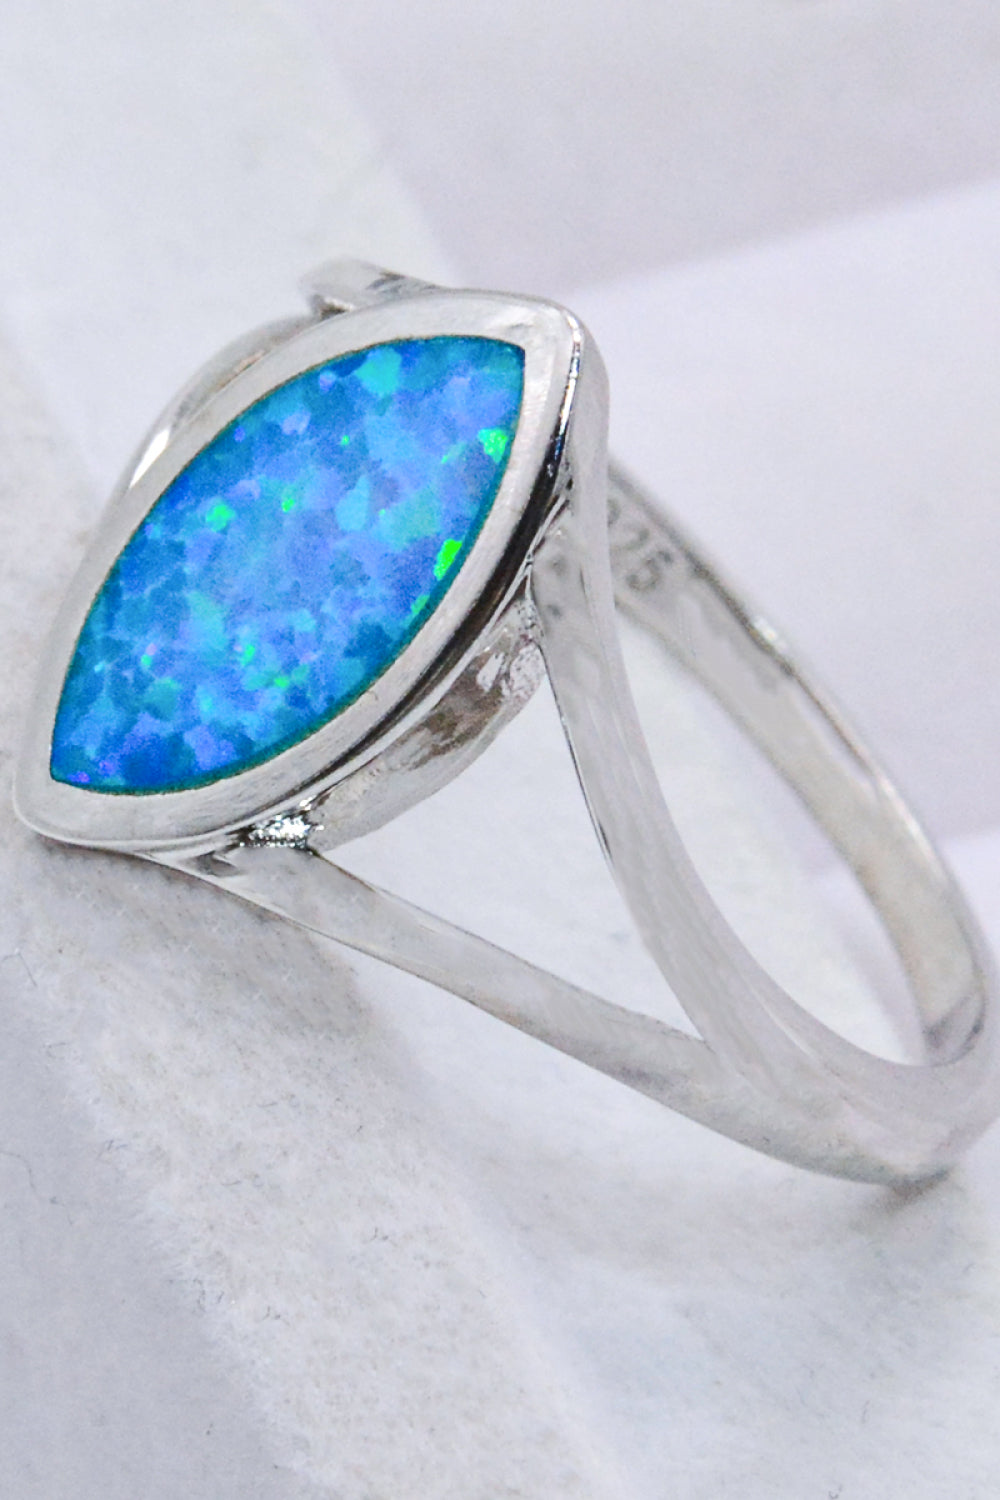 925 Sterling Silver Split Shank Opal Ring - Tophatter Shopping Deals - Electronics, Jewelry, Auction, App, Bidding, Gadgets, Fashion